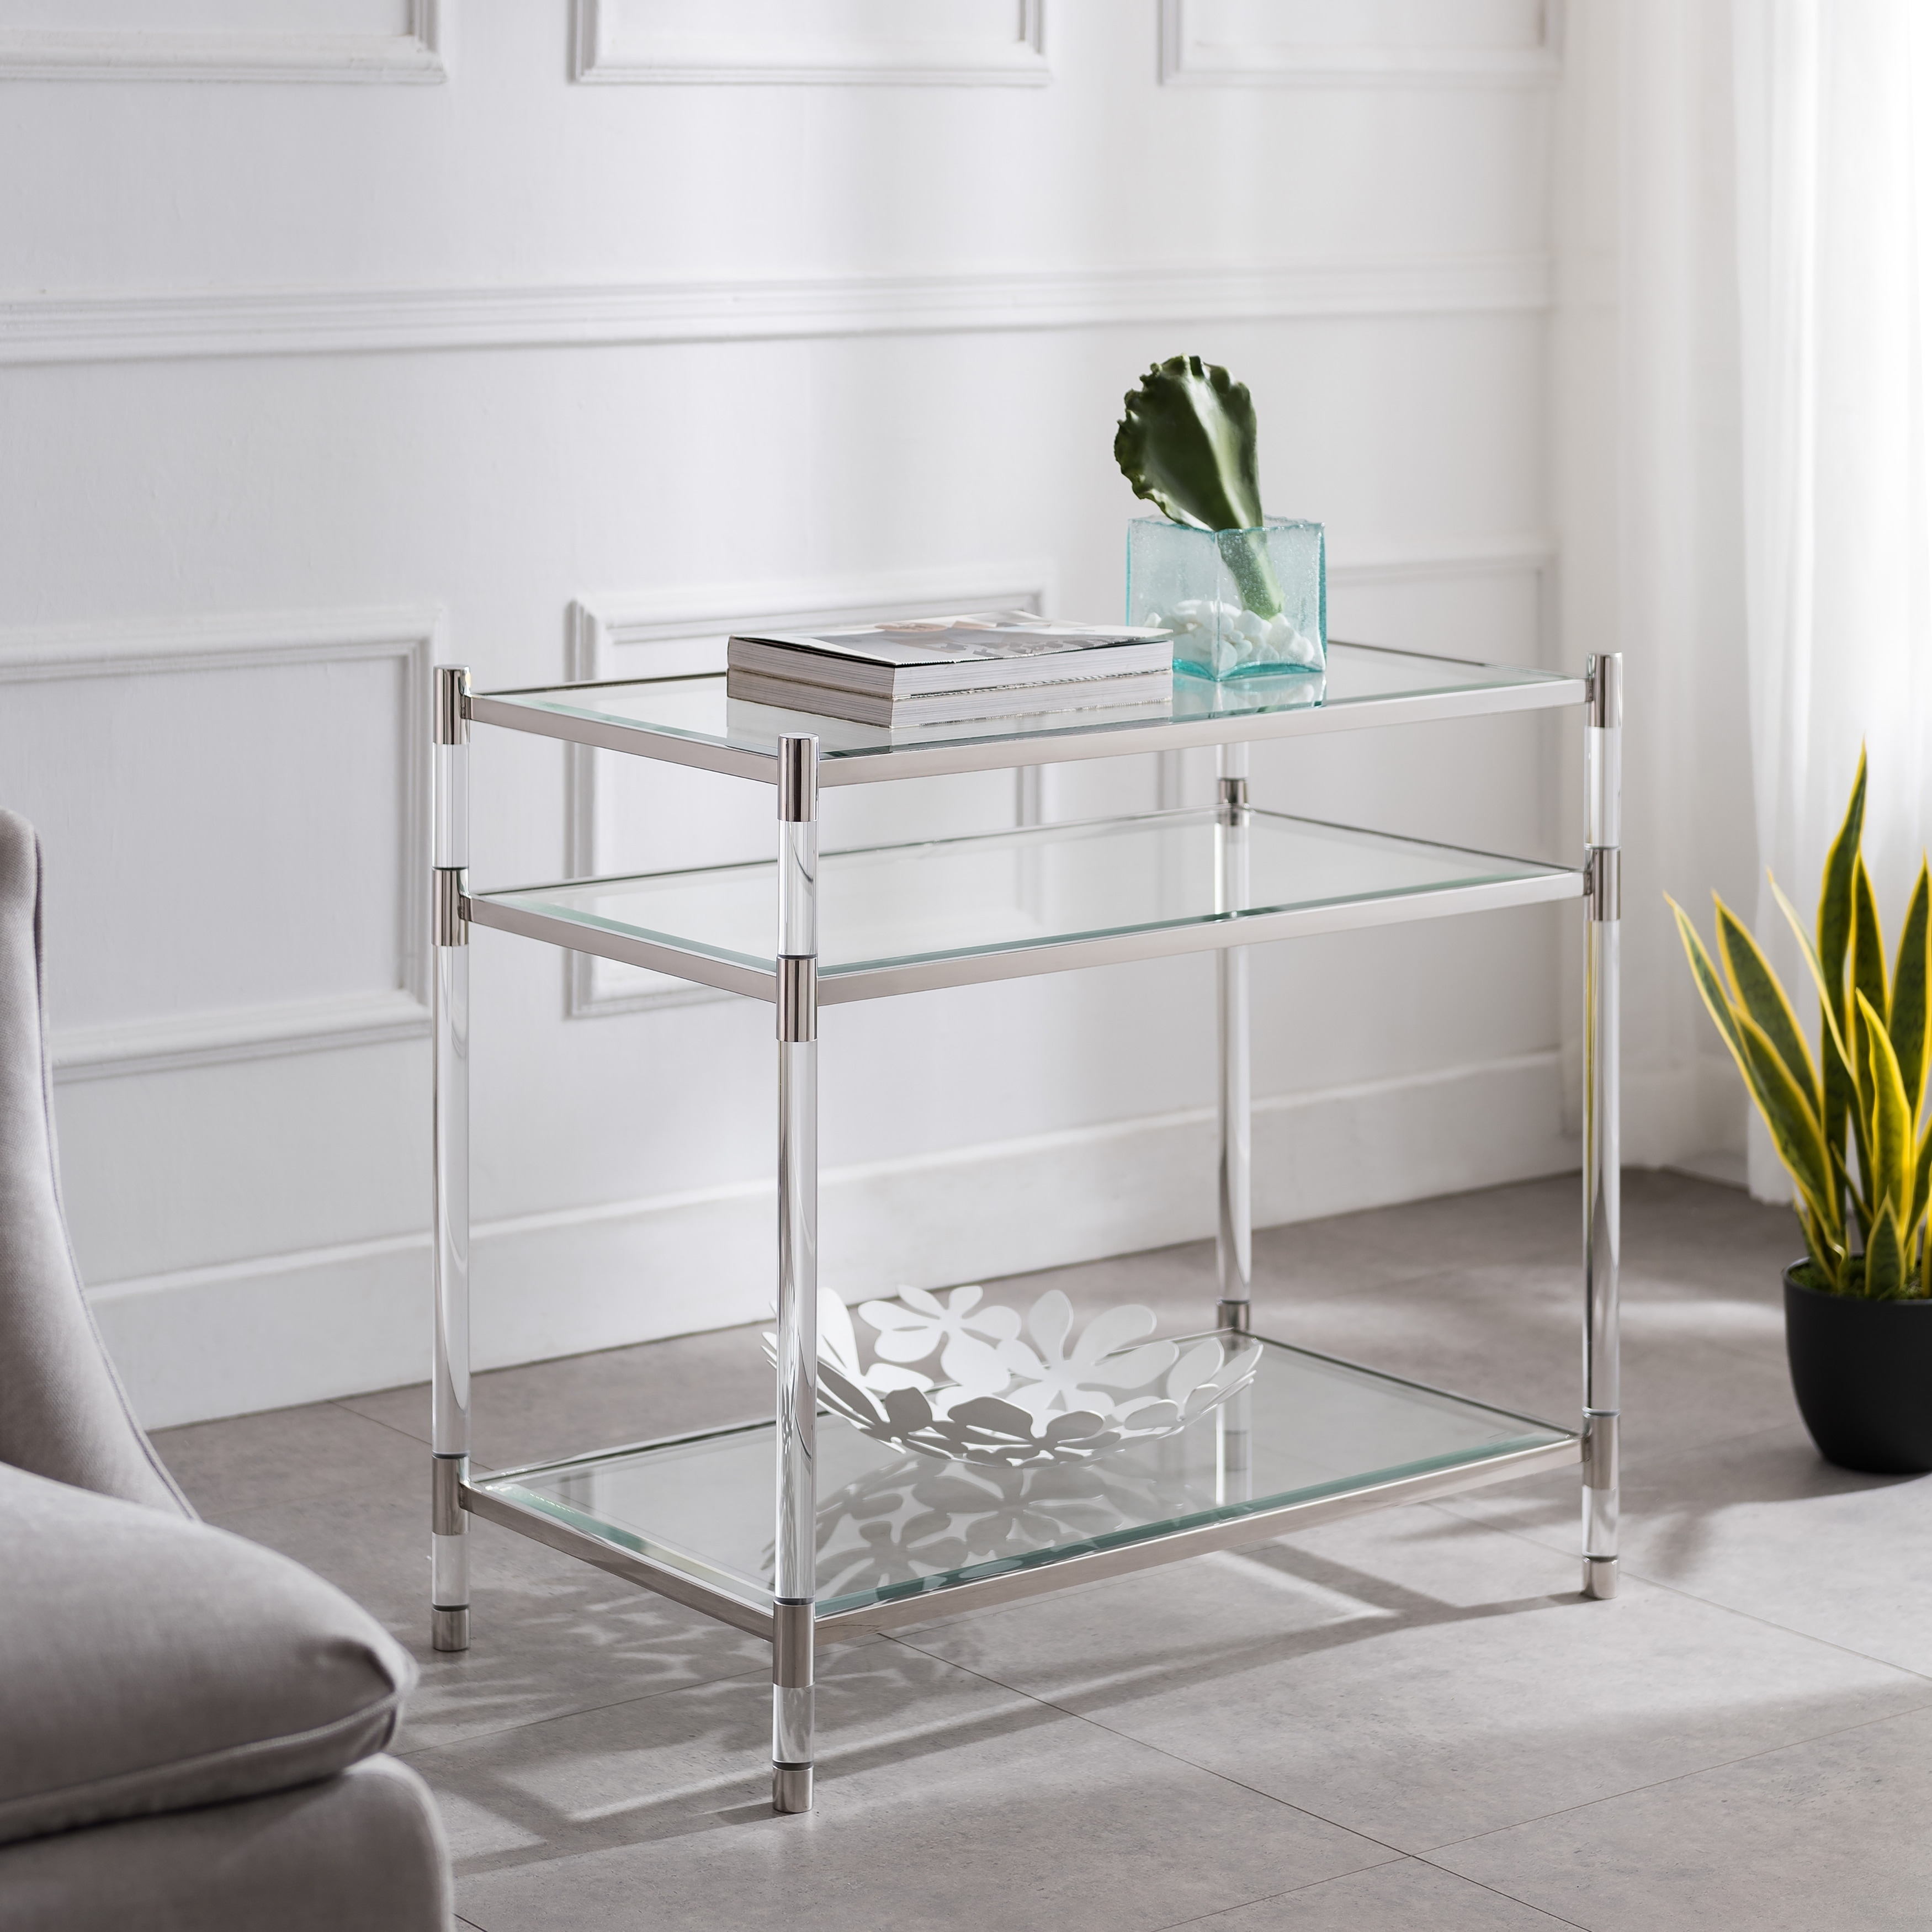 silver orchid aldor tall acrylic accent table free harper blvd cerrol glass shipping today outdoor bench decorative with drawers kidney coffee balcony furniture chair leg